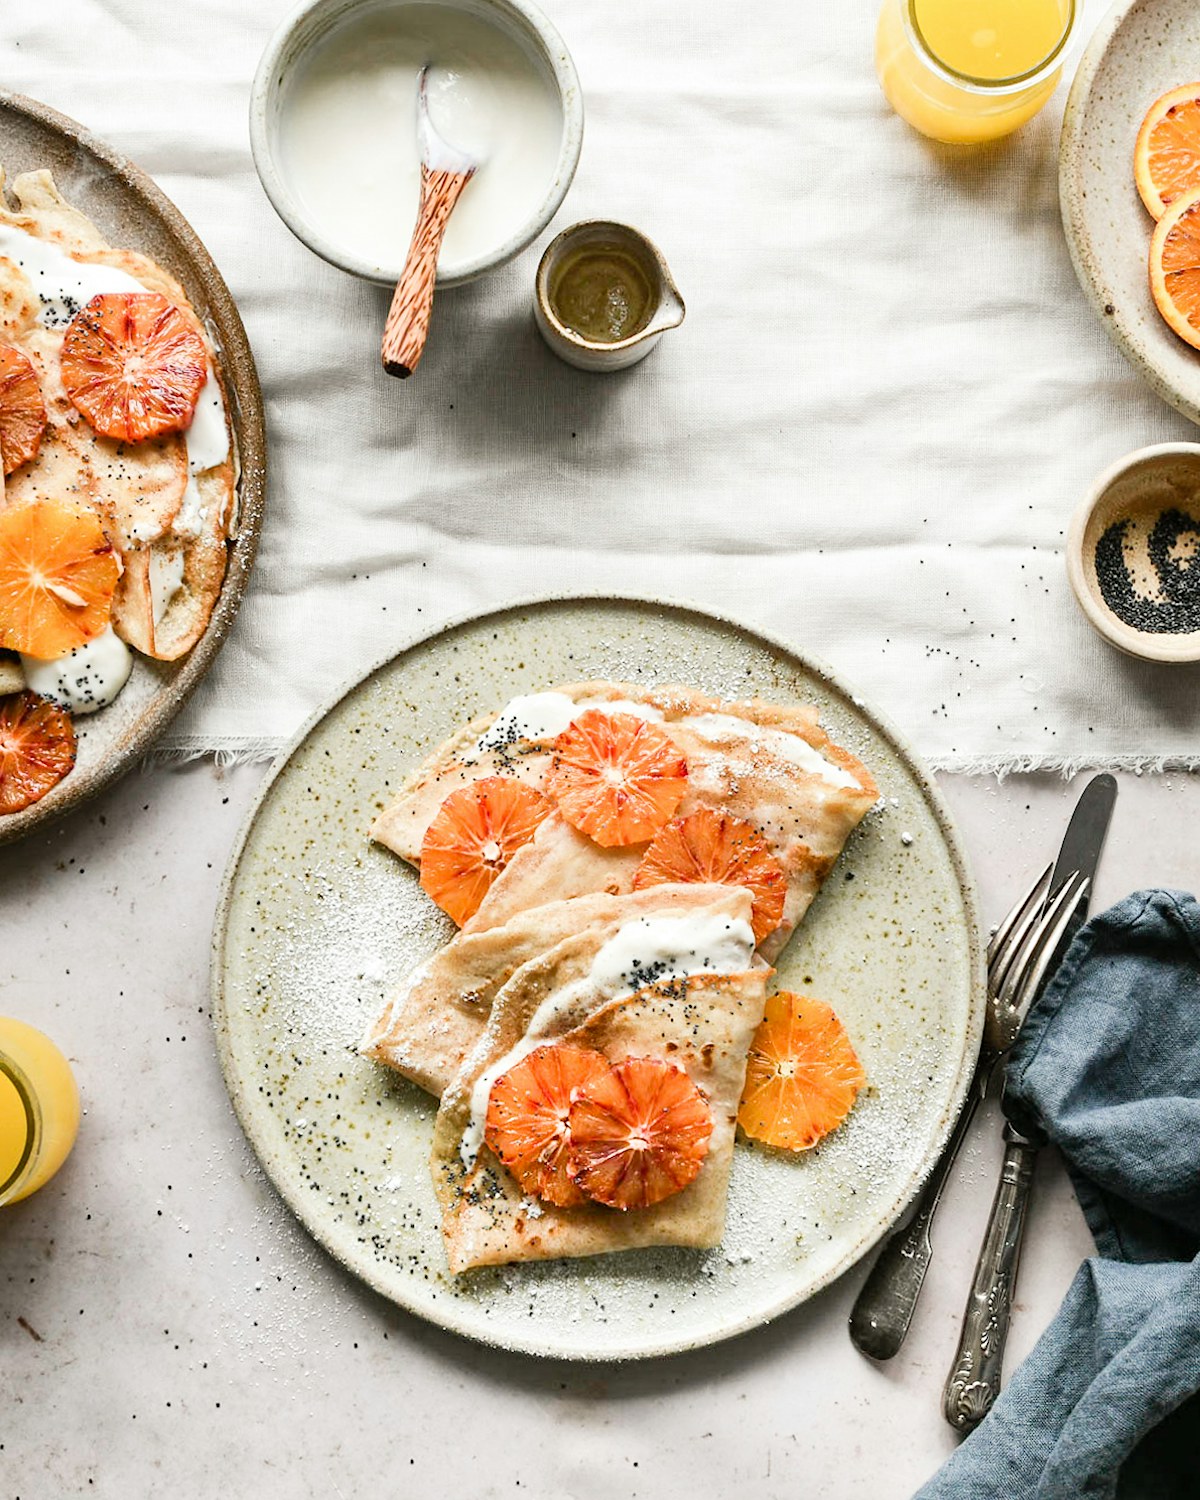 French Cr﻿﻿﻿﻿êpes with Blood Orange & Poppy Seeds